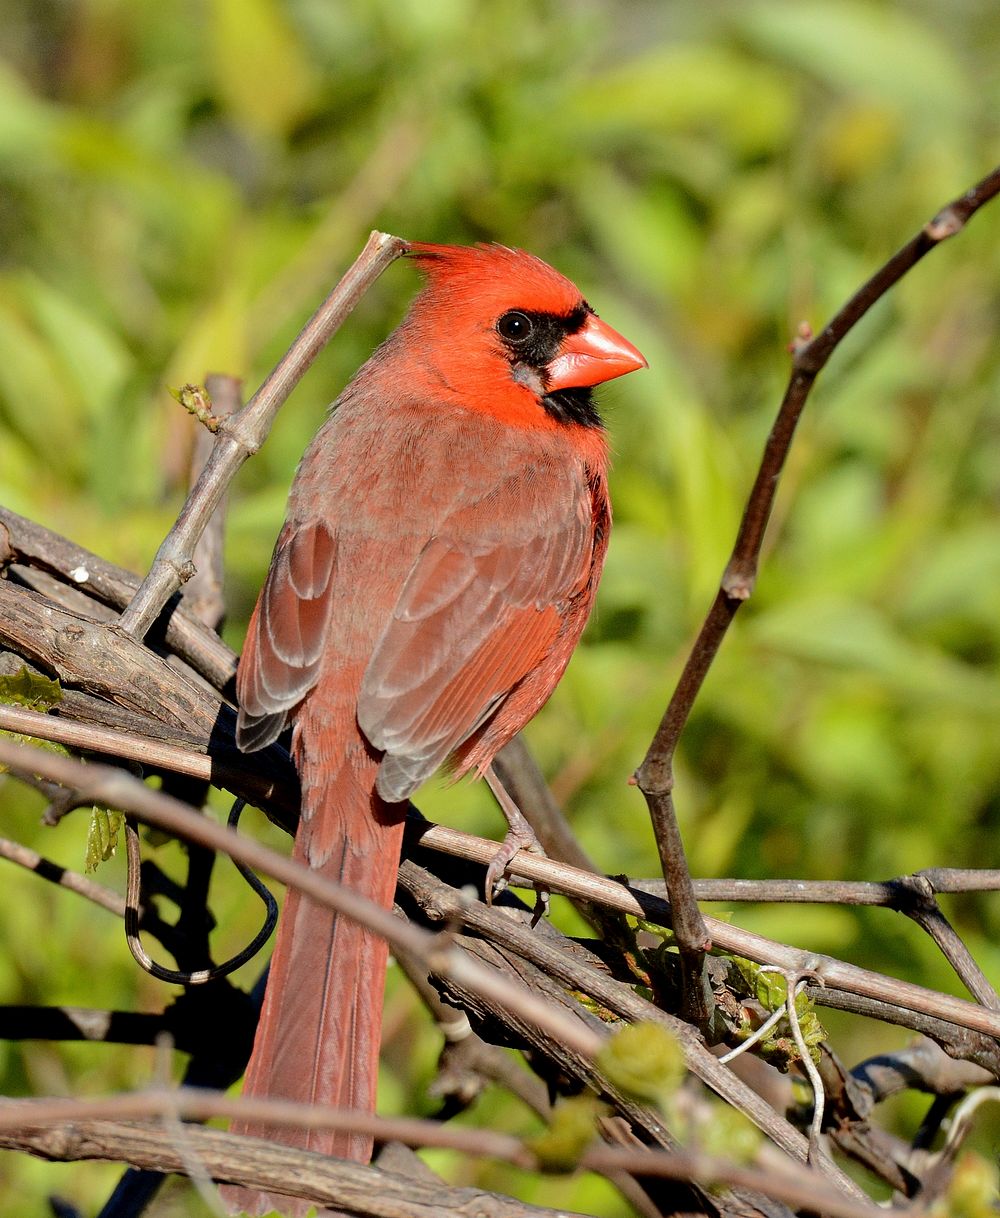 Northern Cardinal in DeWitt, MIPhoto by Jim Hudgins/USFWS. Original public domain image from Flickr